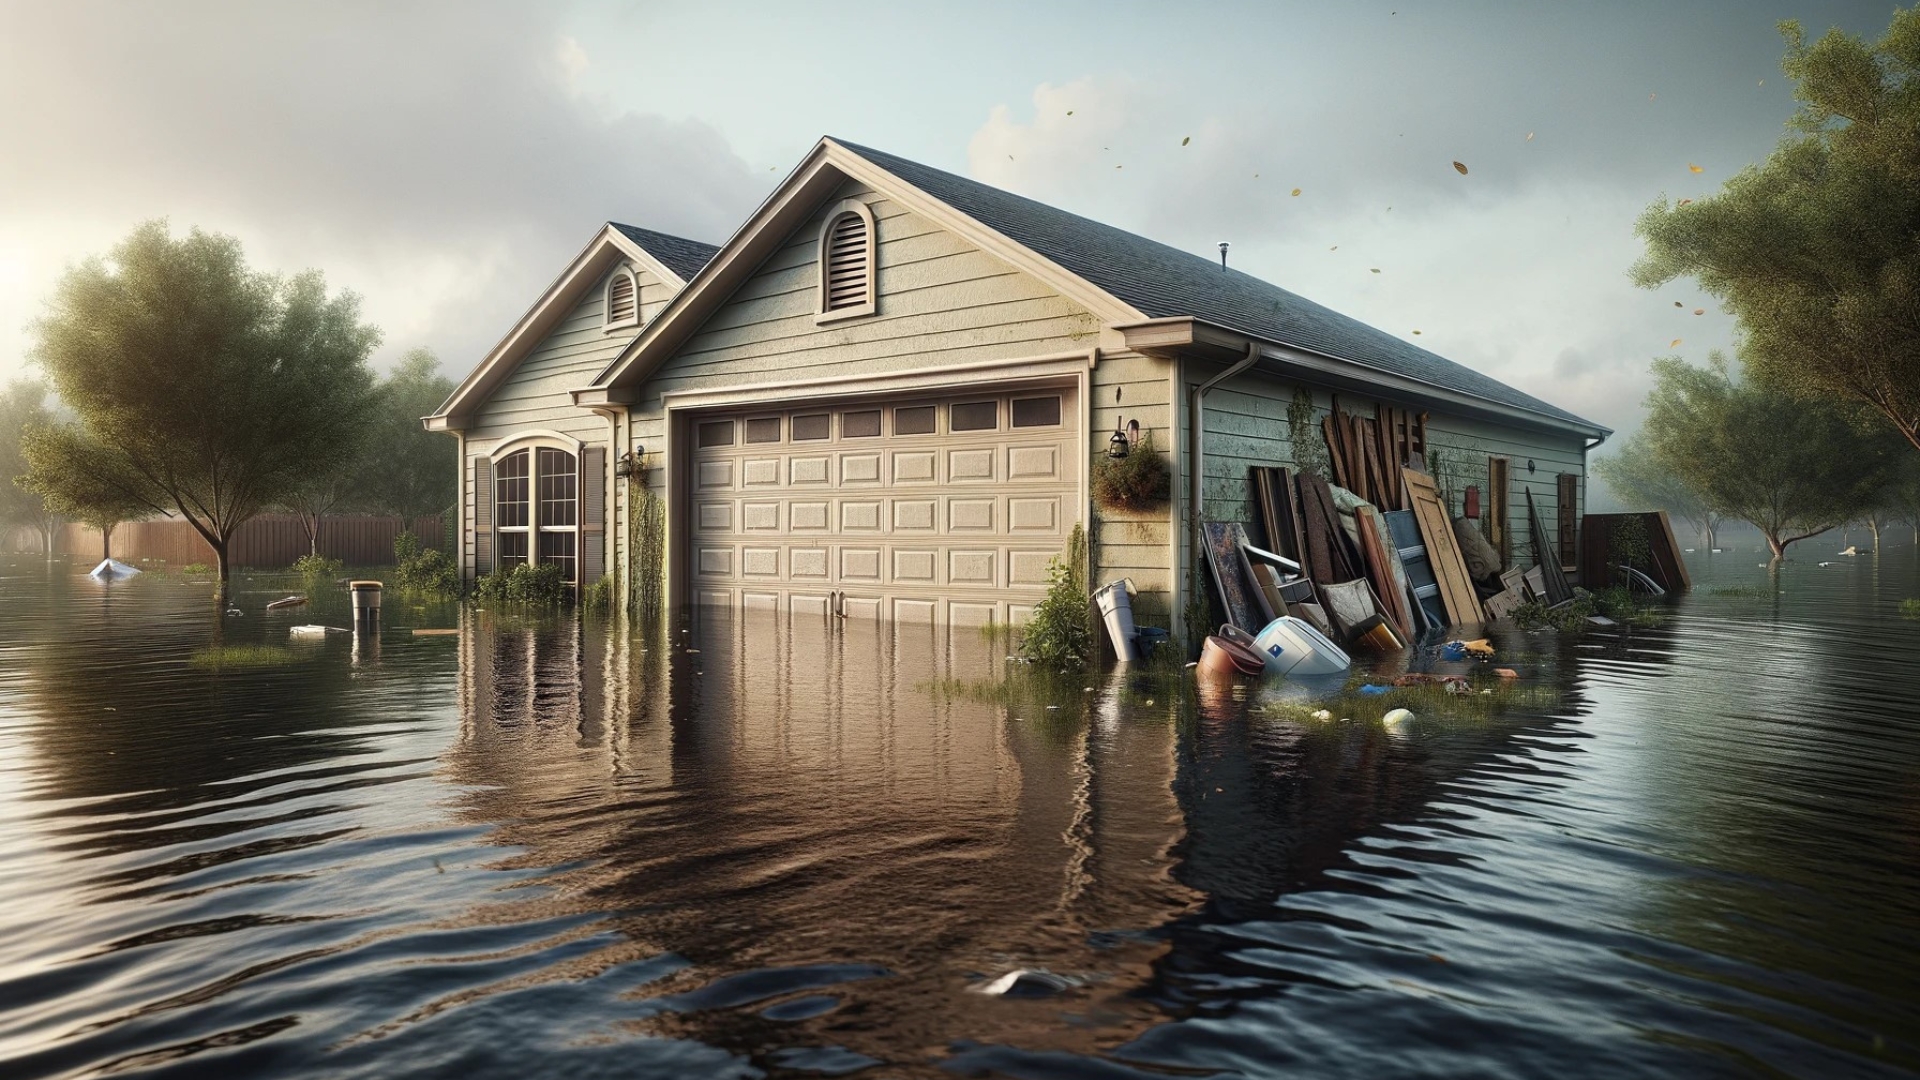 A house with attached garage submerged in floodwater